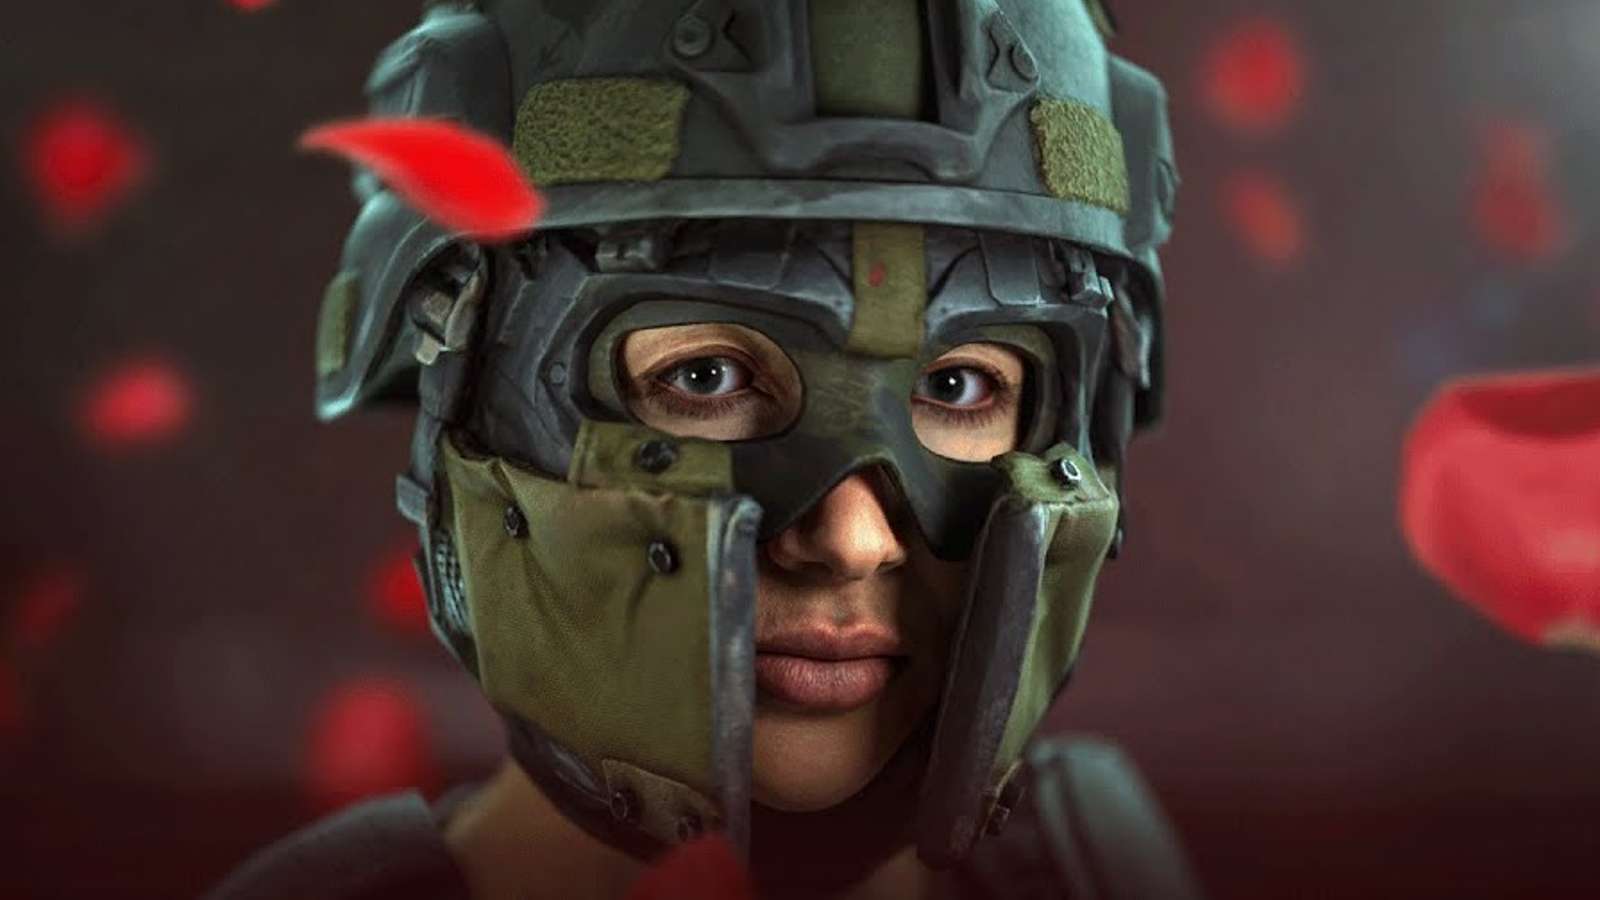 operator roze with roze and thorn pay to win bundle skin equipped.